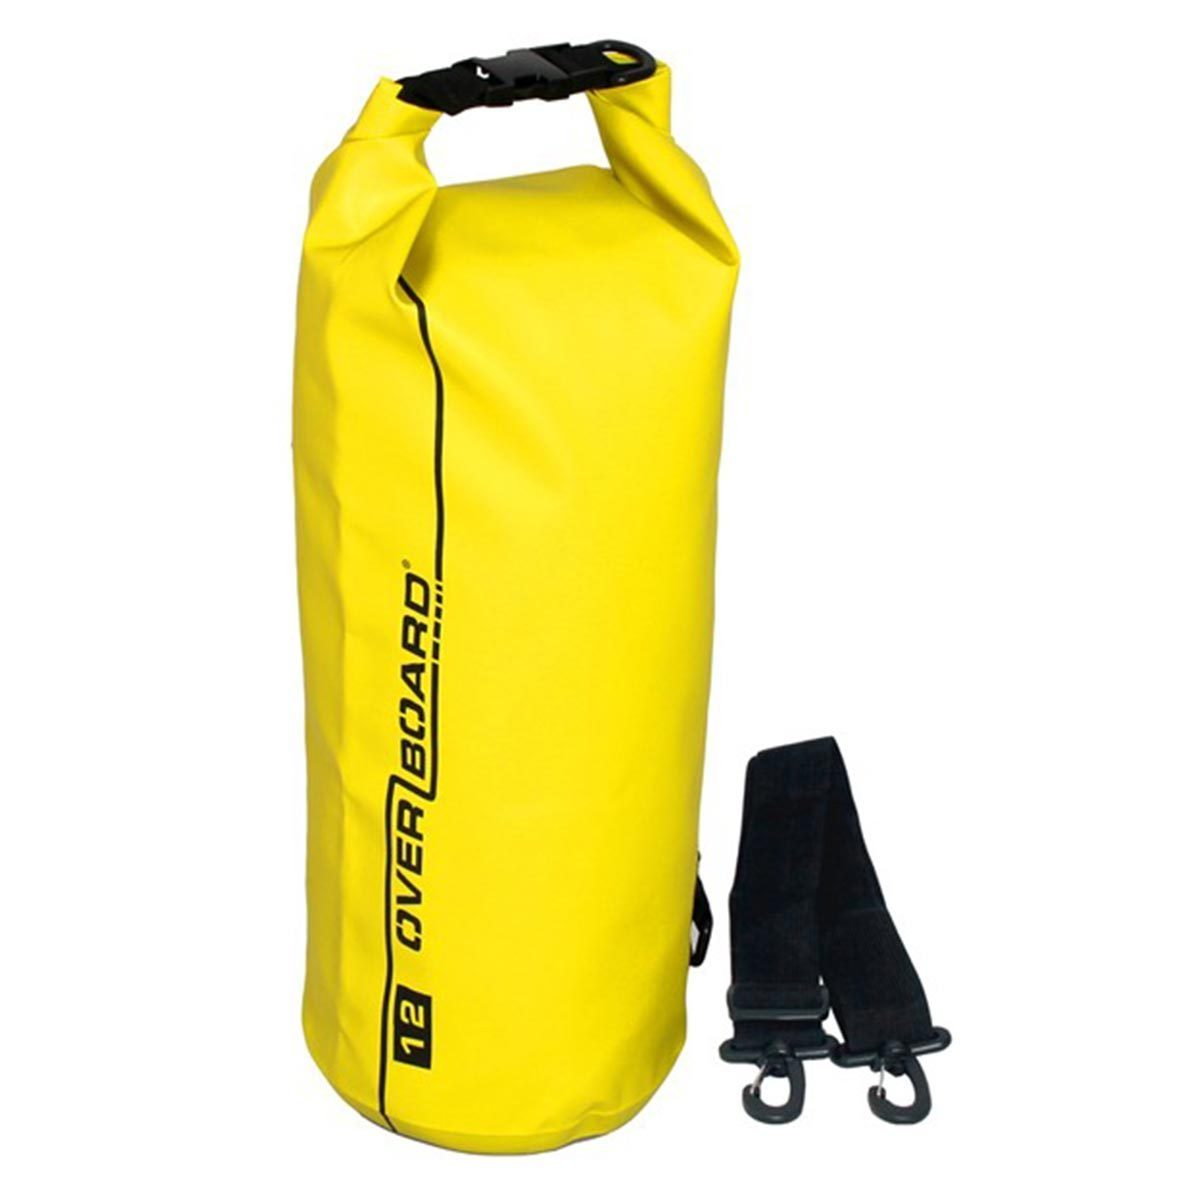 Overboard 12 Litre Dry Tube Bag Bags, Packs and Cases Overboard Yellow Tactical Gear Supplier Tactical Distributors Australia